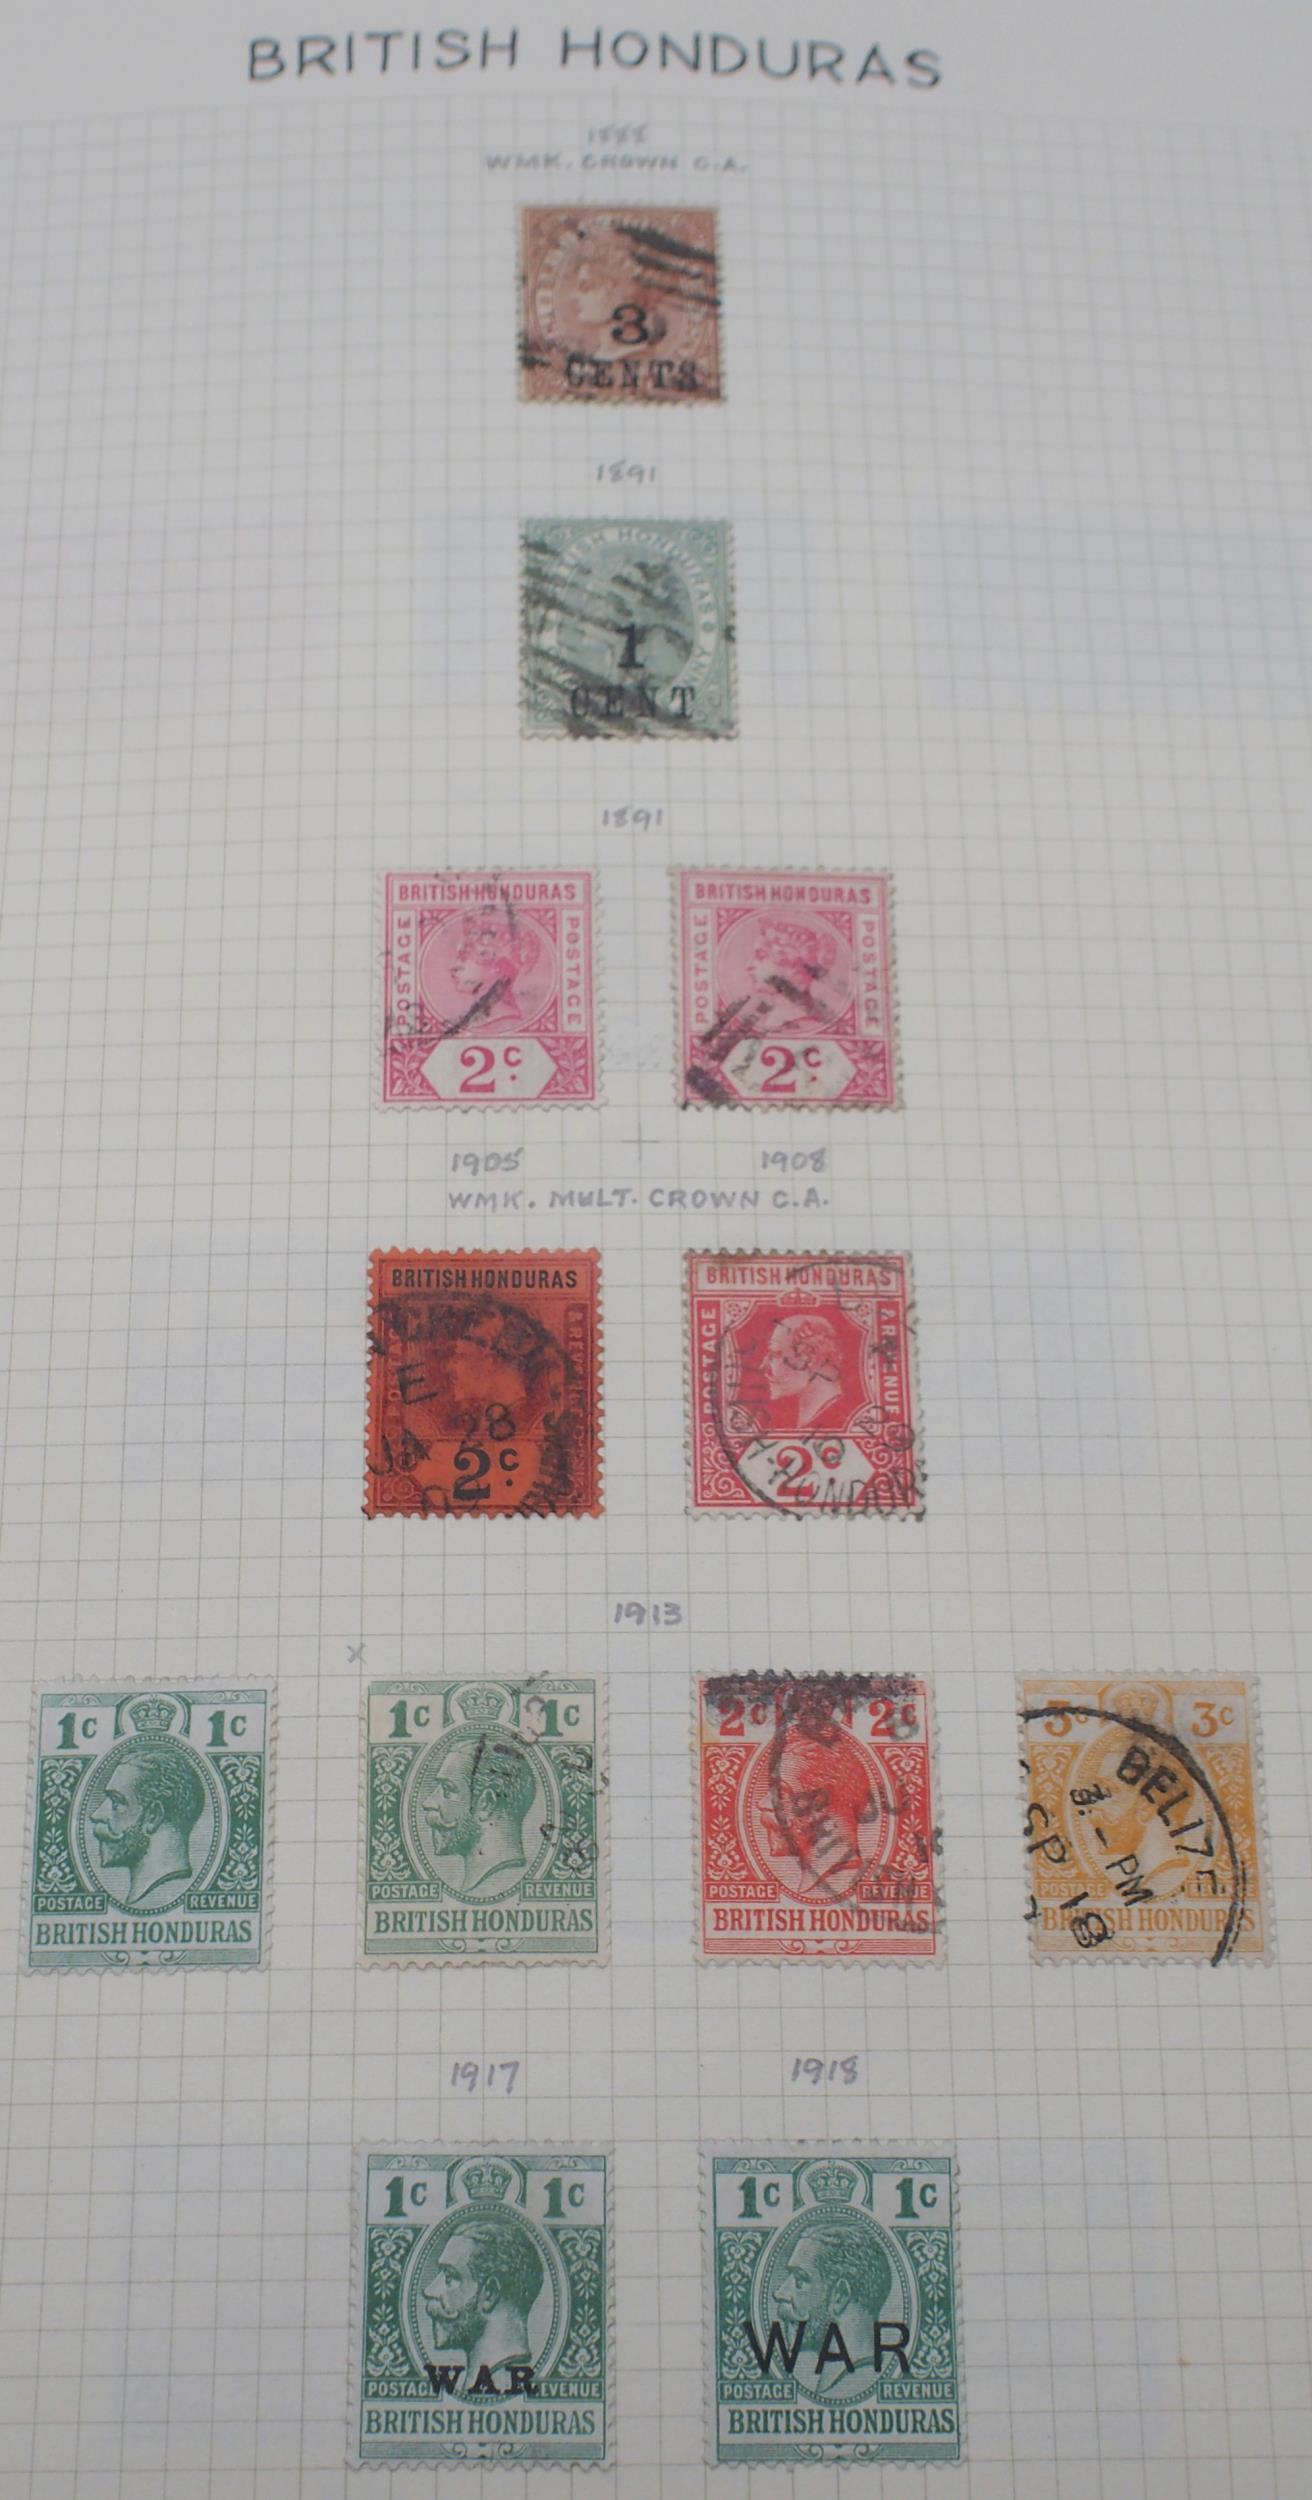 British Colonies and Protectorate stamps in a Stanley Gibbons Devon Stamp Album from 1867 Heligoland - Image 14 of 39